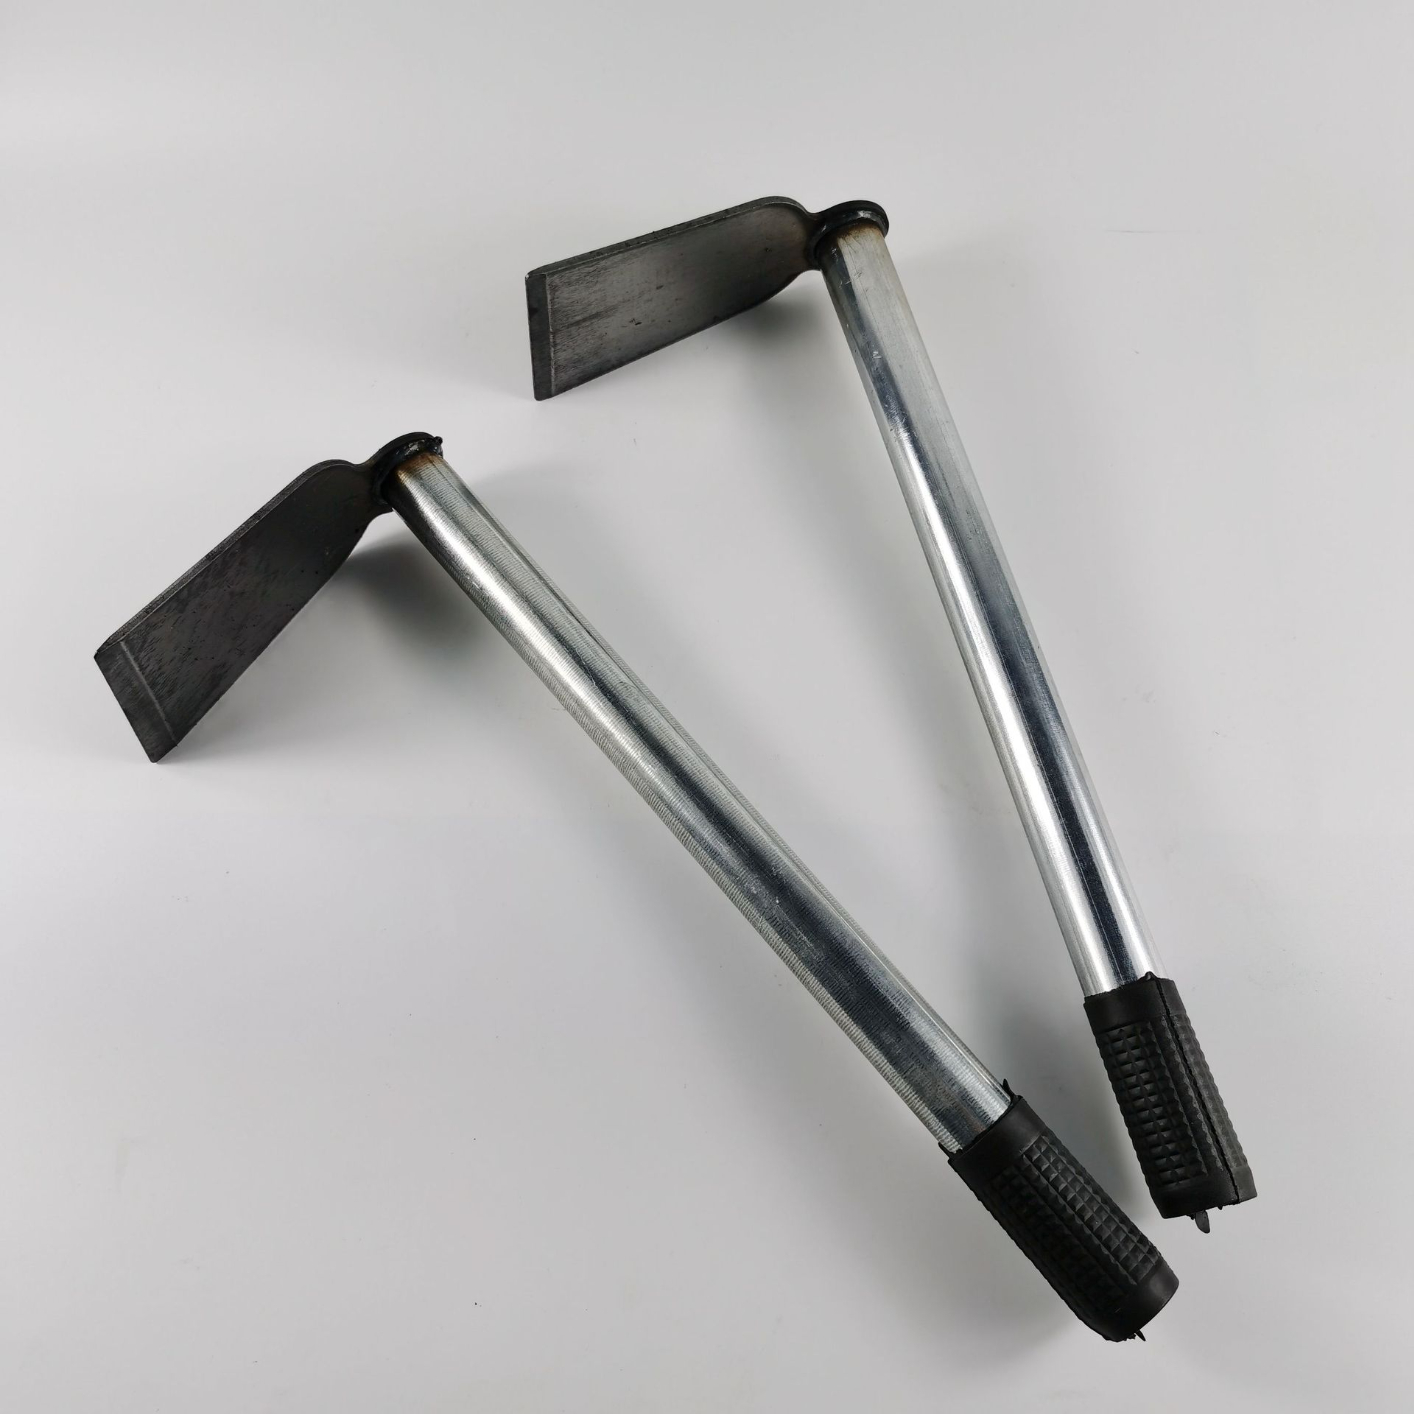 Galvanized tube hoe flat hoe gardening hoe gardening tools agricultural tools hoe handle hoe Source
